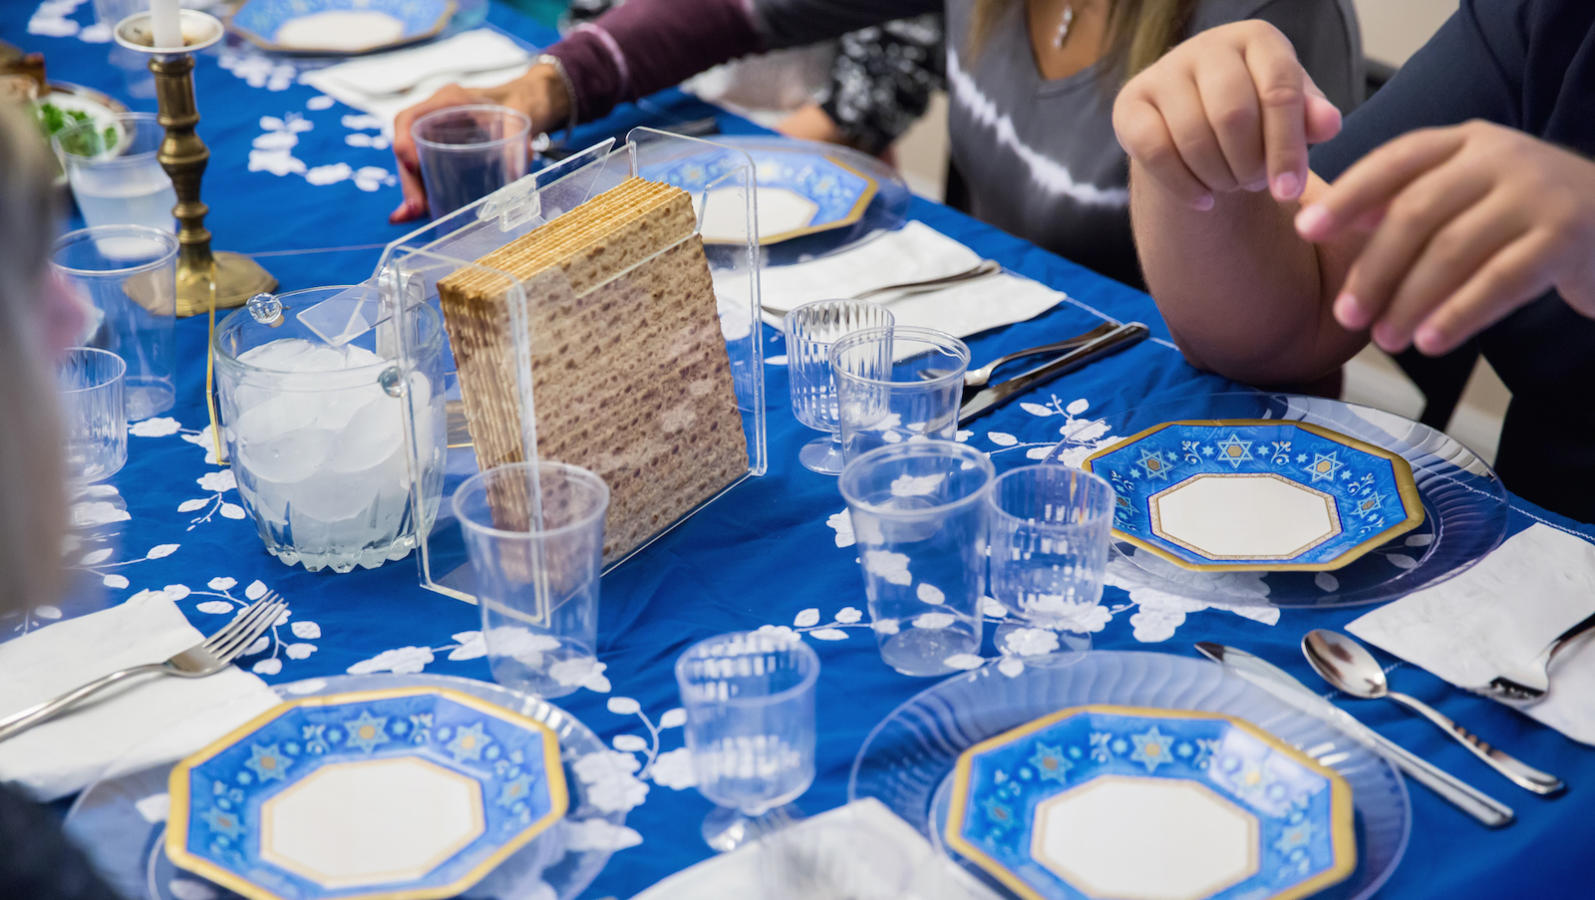 A traditional Passover seder table, featuring matzah, glasses of wine, and other traditional Passover foods.